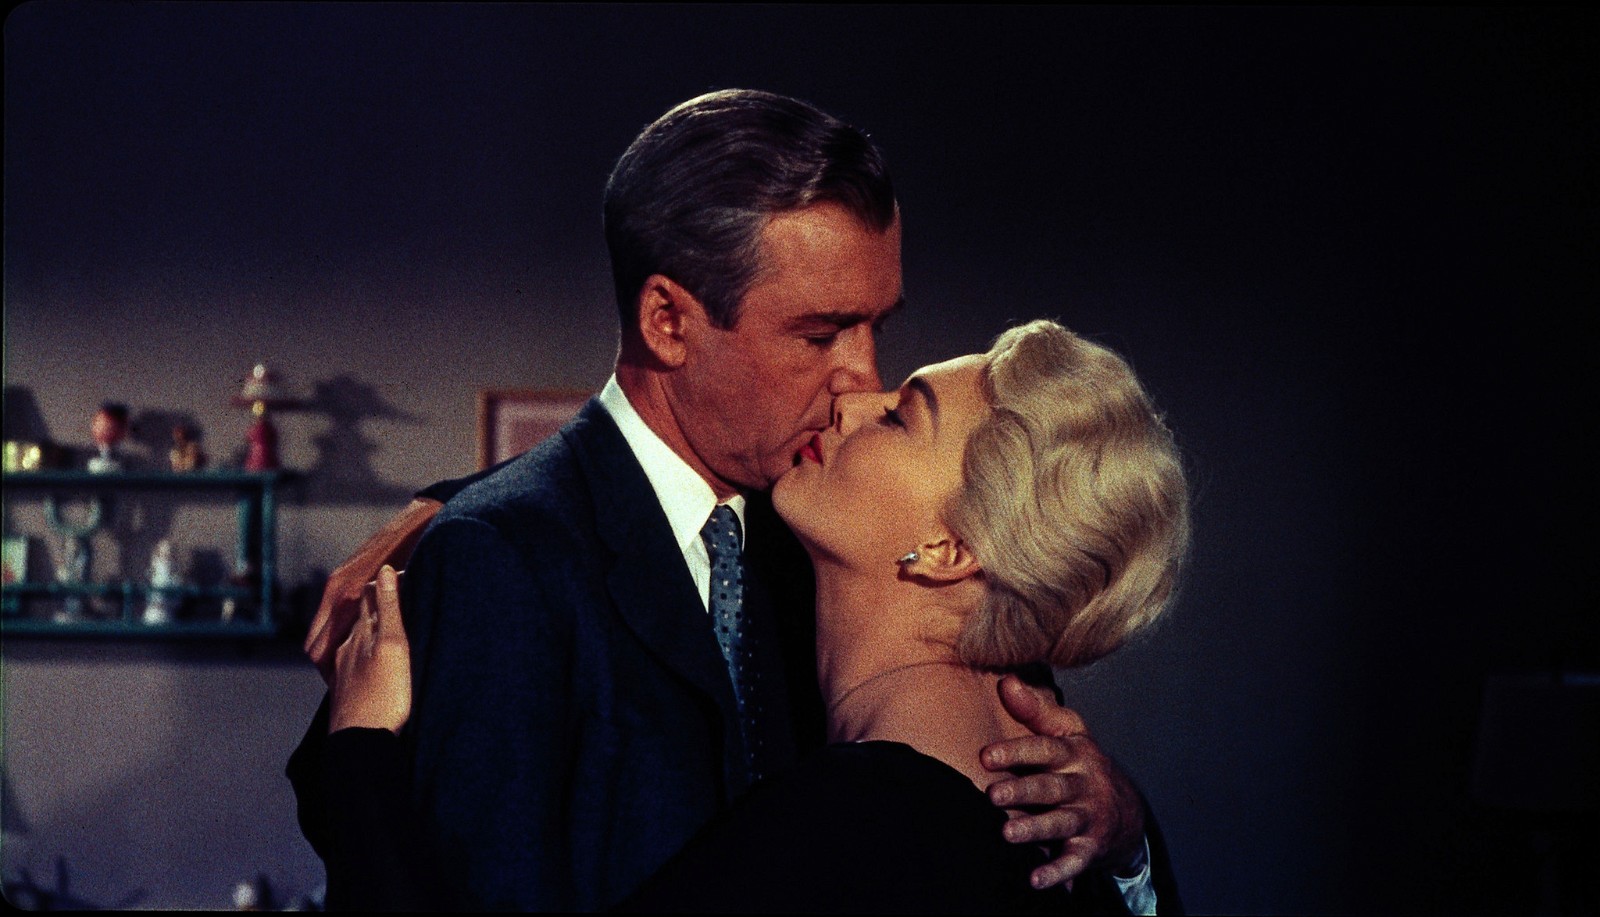 Alfred Hitchcock's Vertigo is one of his most acclaimed films